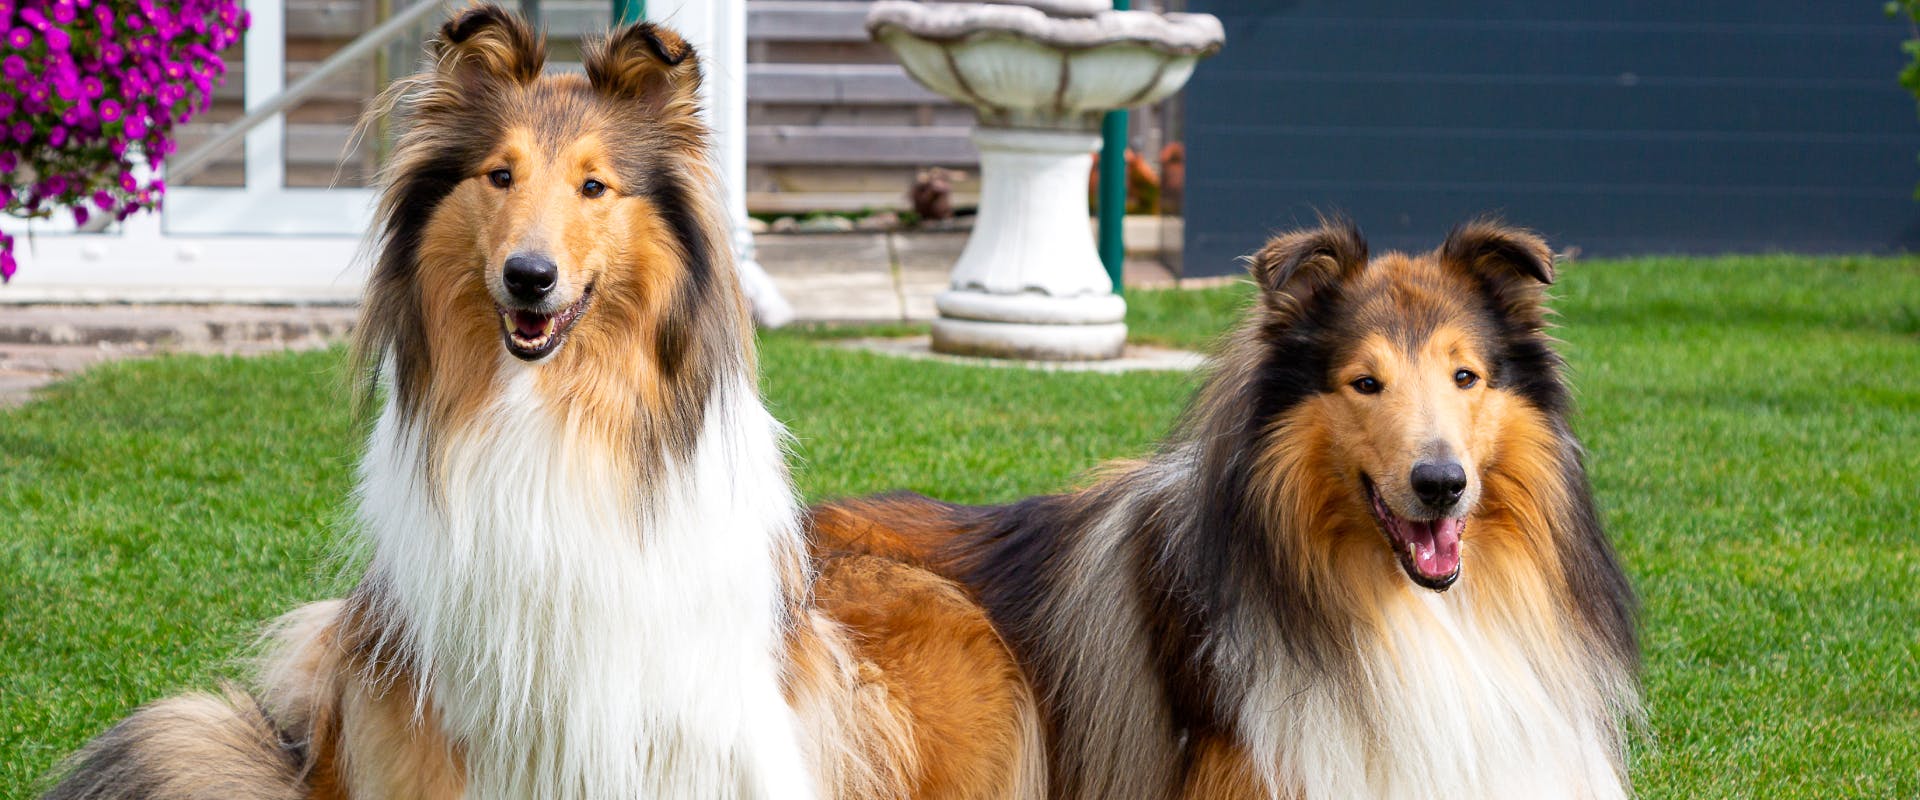 two tri-colored long haired rough collies in a backyard